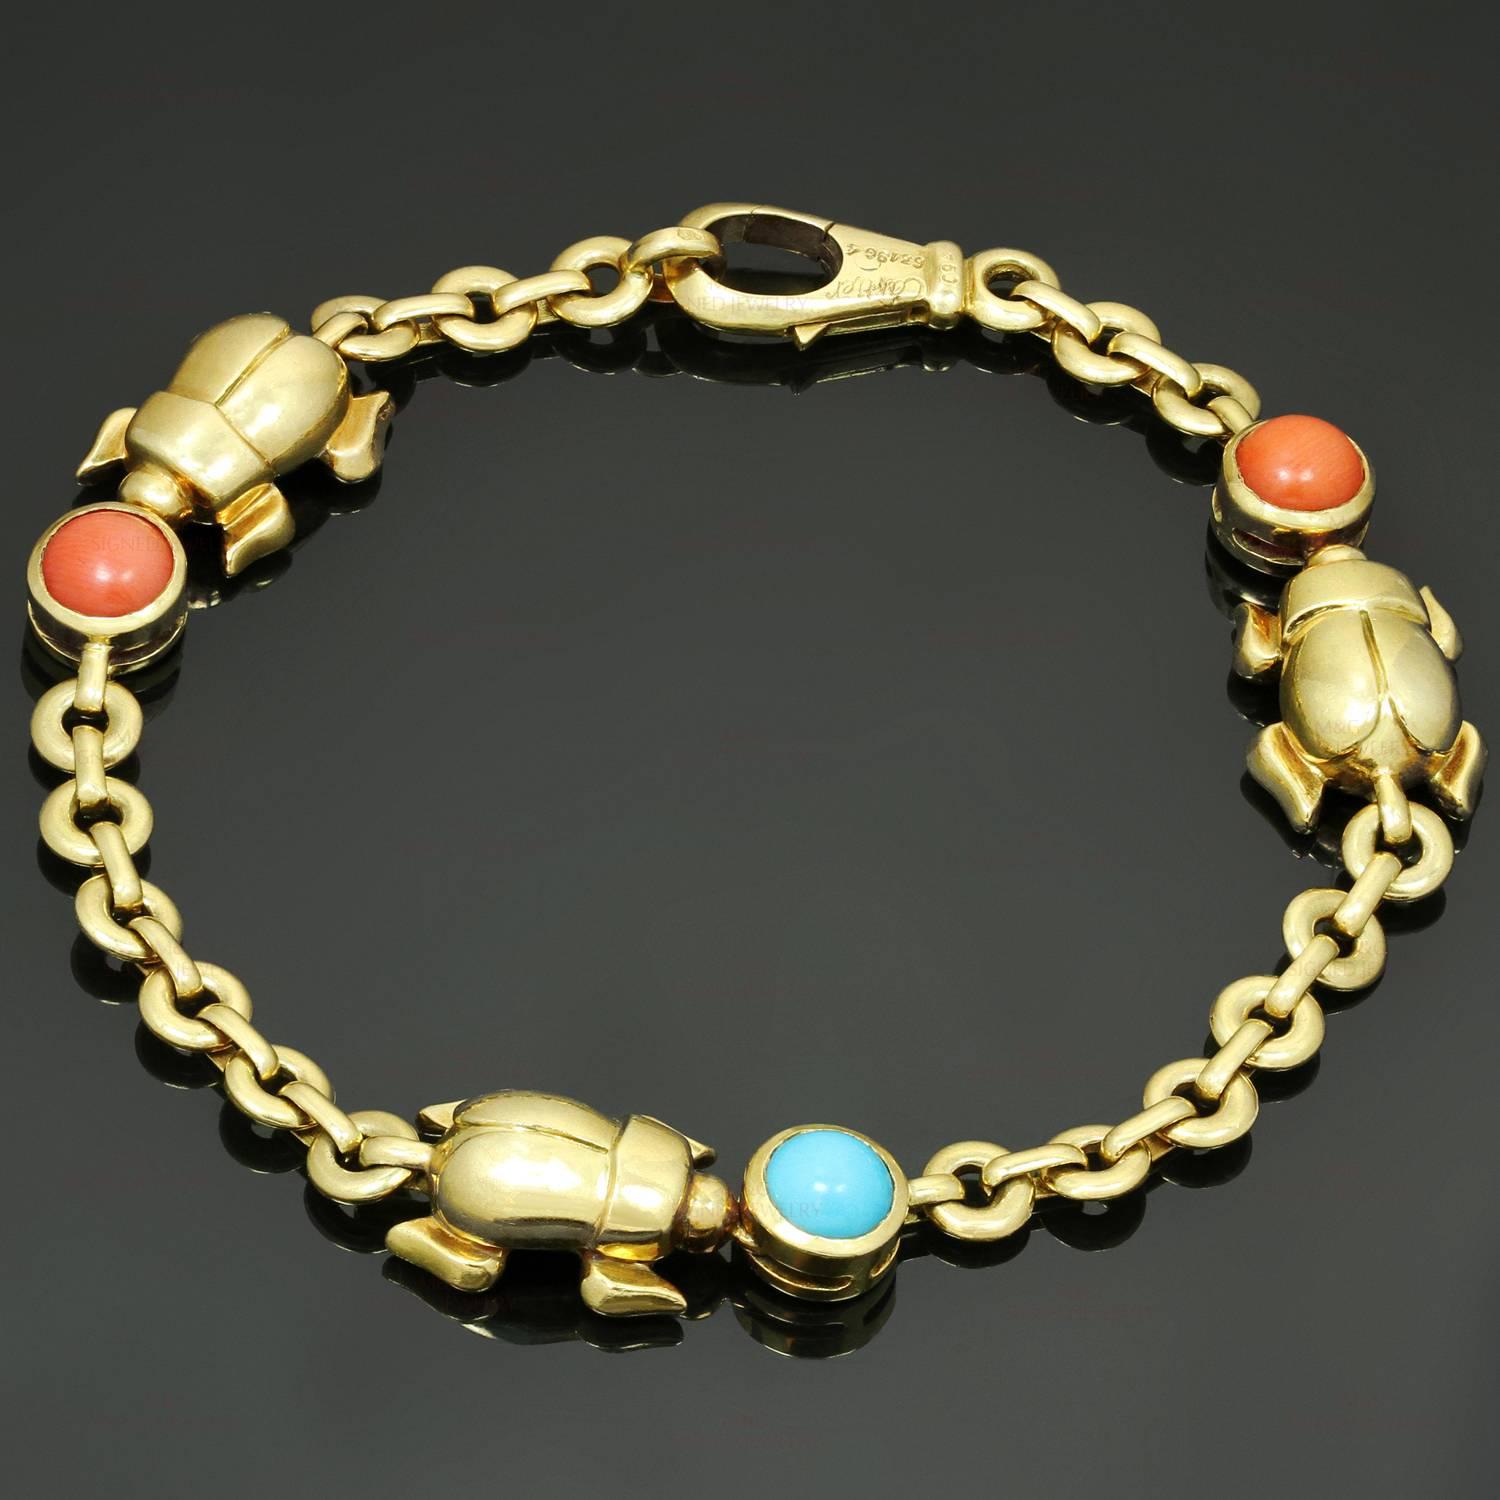 This rare Cartier bracelet is crafted in 18k yellow gold and features 3 timeless bettle-shaped motifs set with a round turquoise and a pair of corals. Made in France circa 1990s. Measurements: 0.43" (11mm) width, 7" (17.7cm) length. 